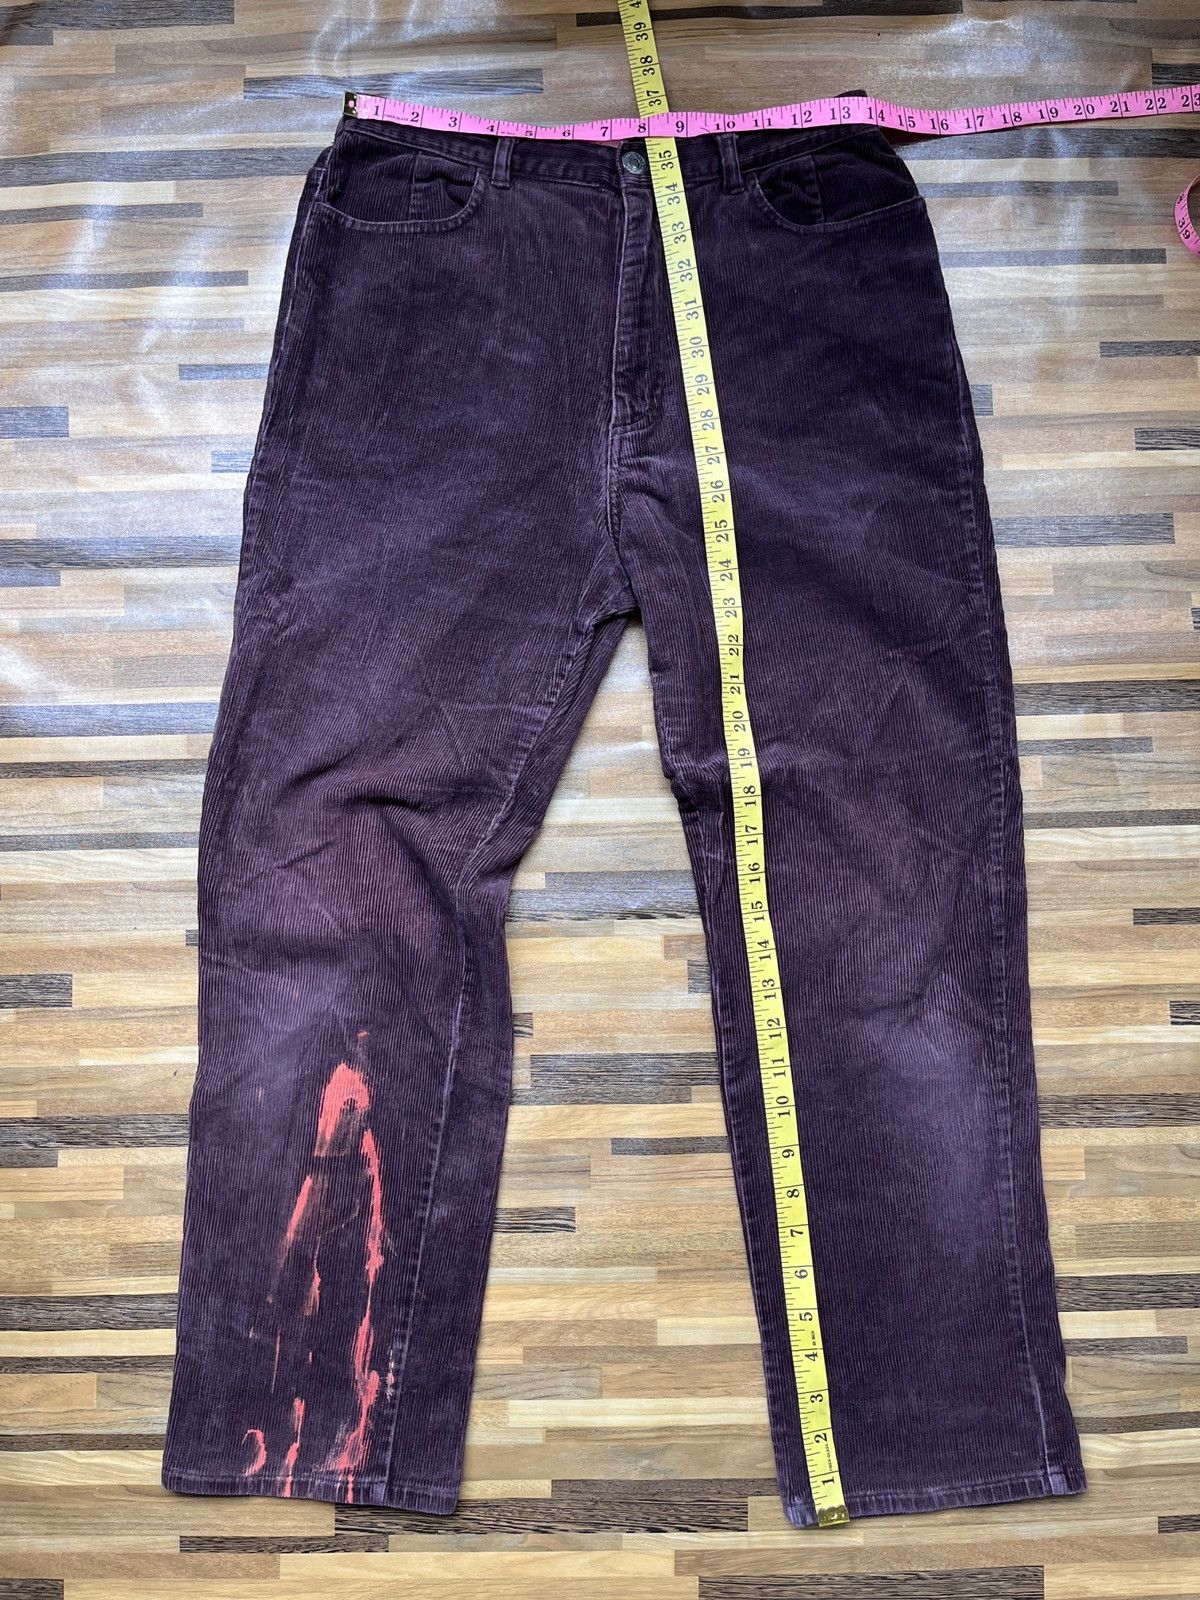 Issey Miyake - IY Grace Issey Japanese Brand Jeans Paints Splatters - 4